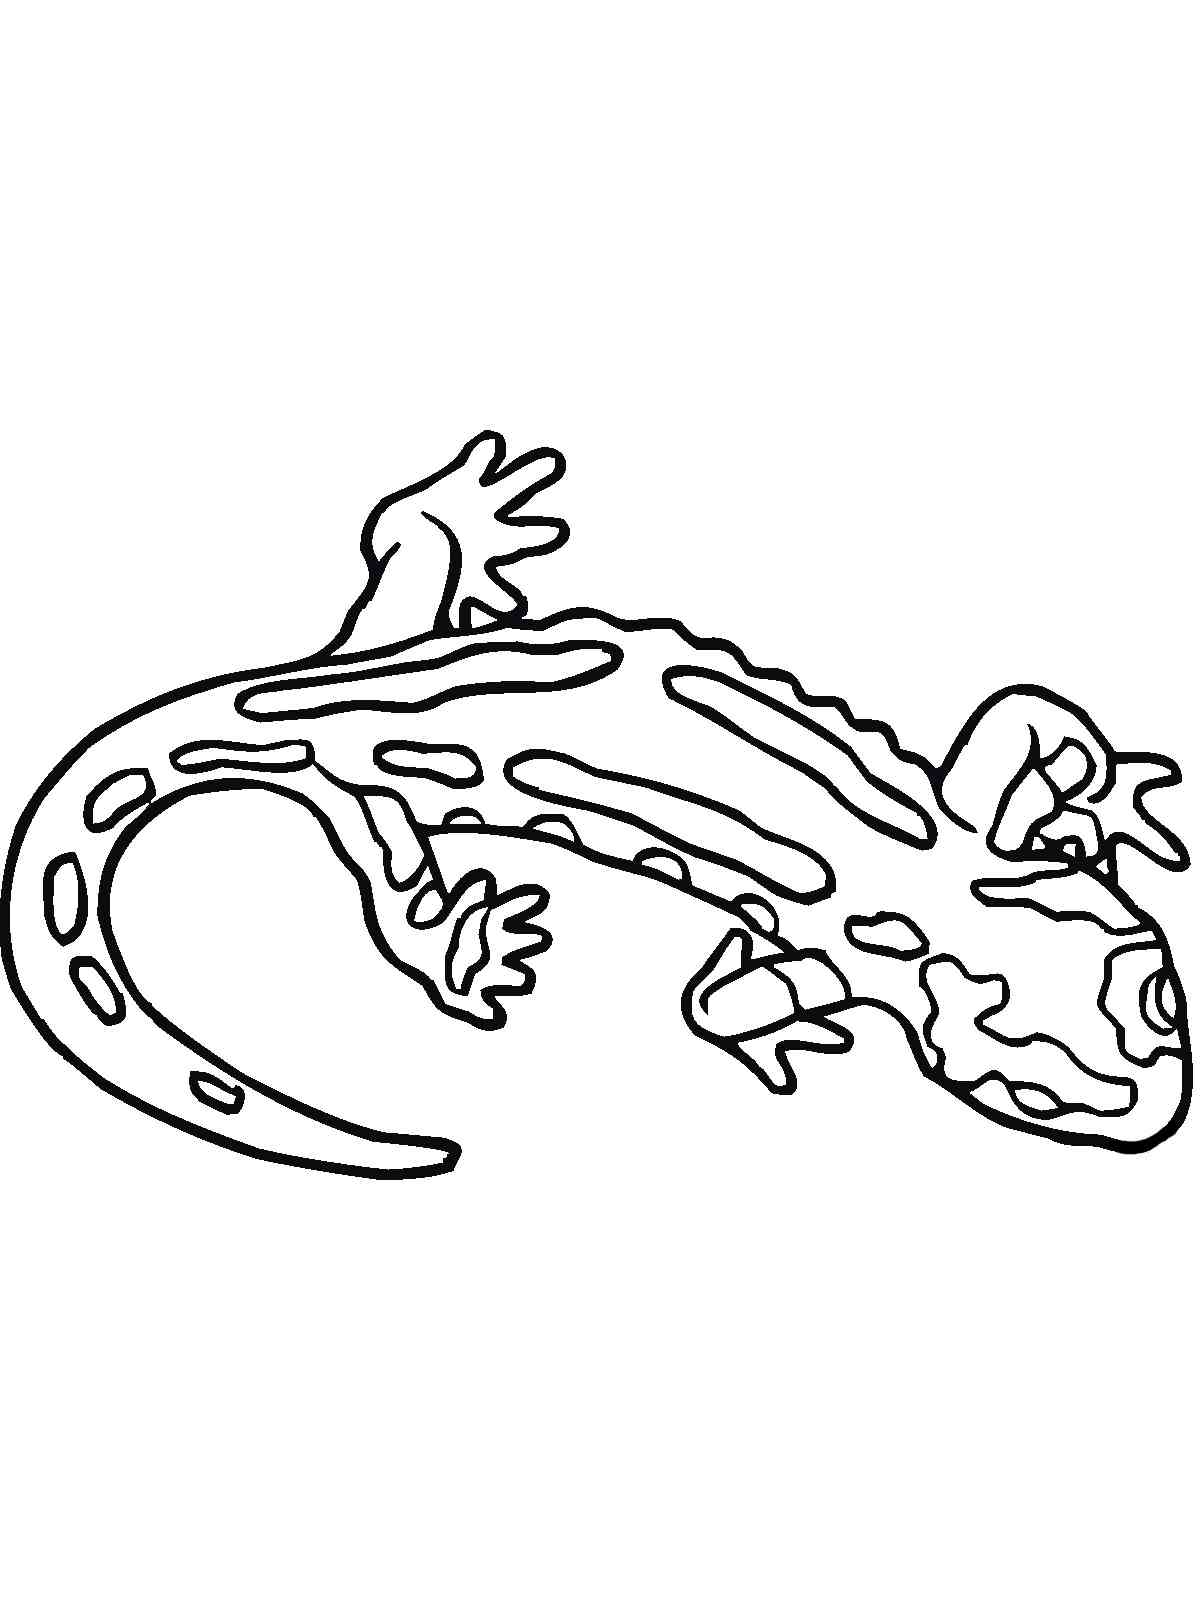 Simple Fire Salamander coloring page